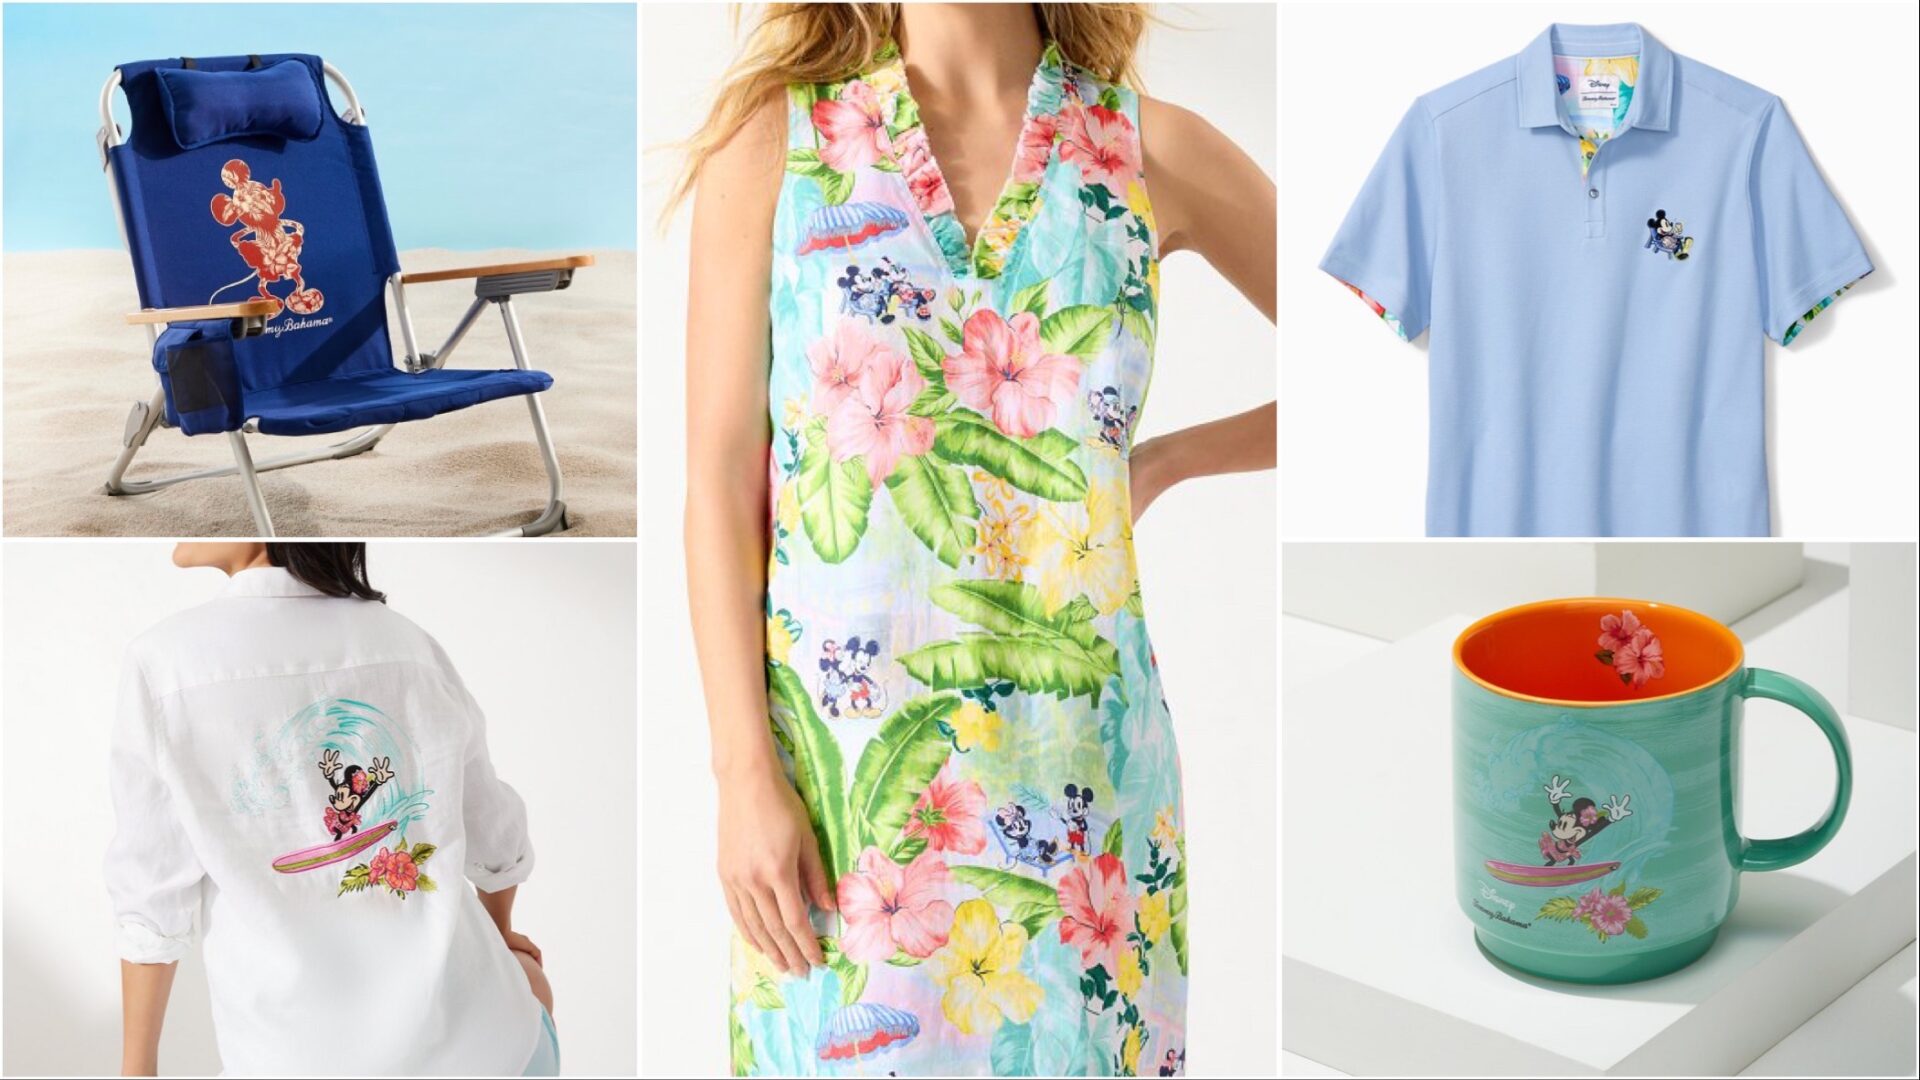 New Tommy Bahama Disney Collection For Your Next Dreamy Vacation!